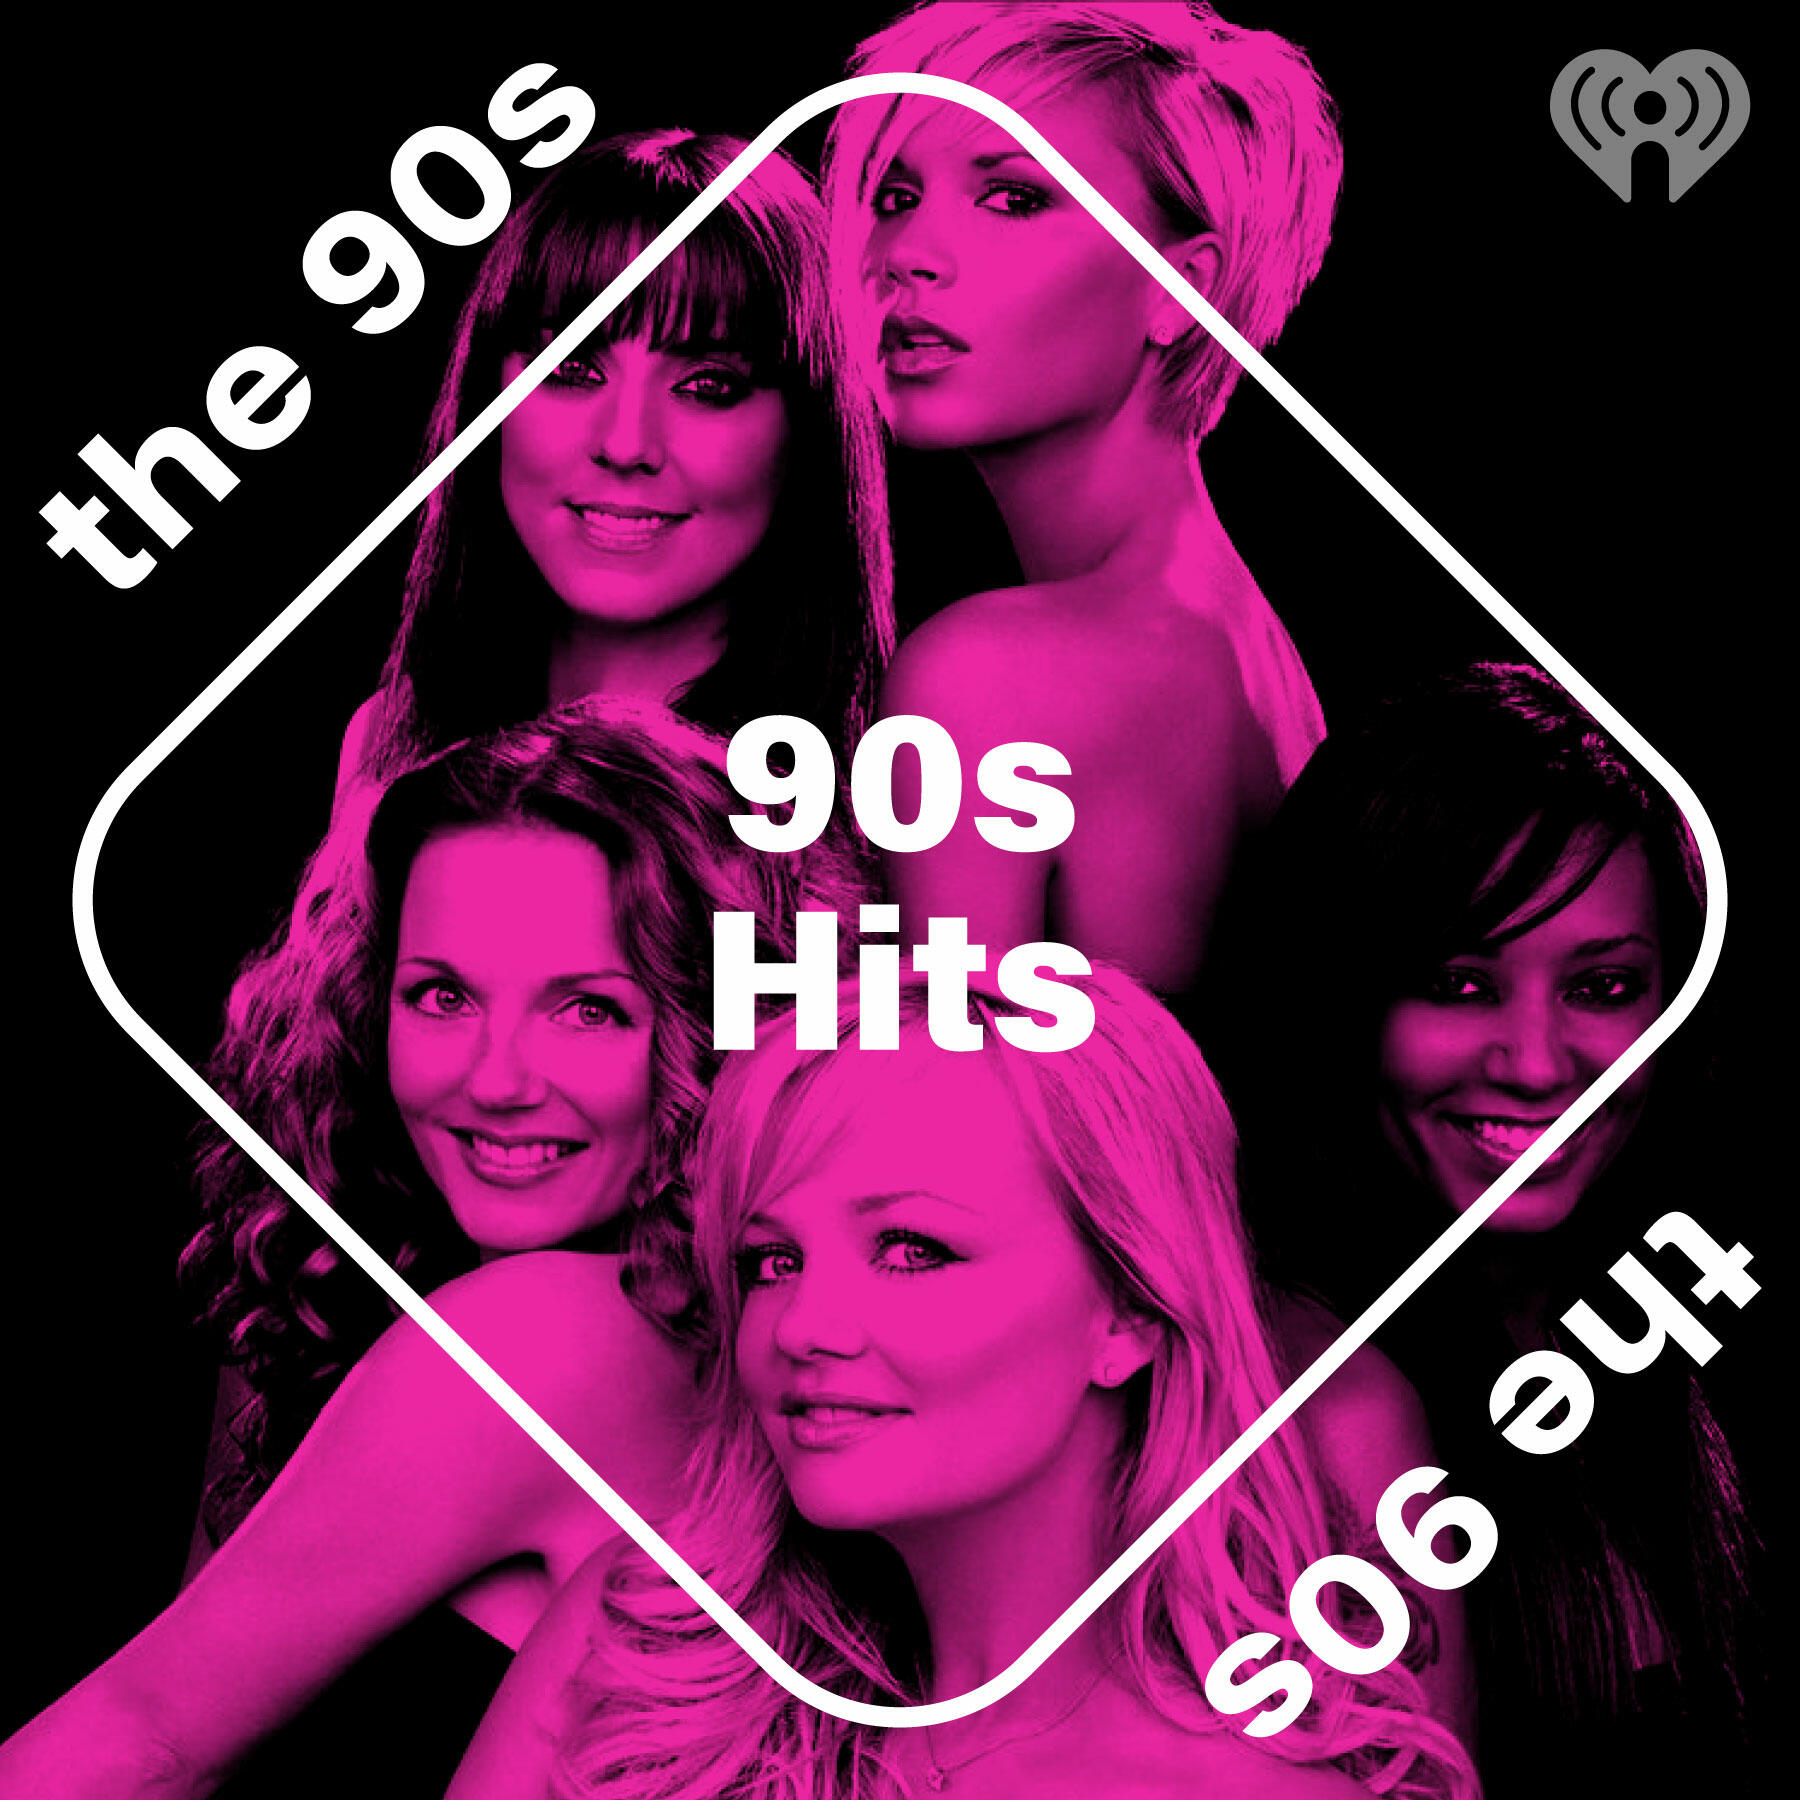 iheartradio 80s and 90s